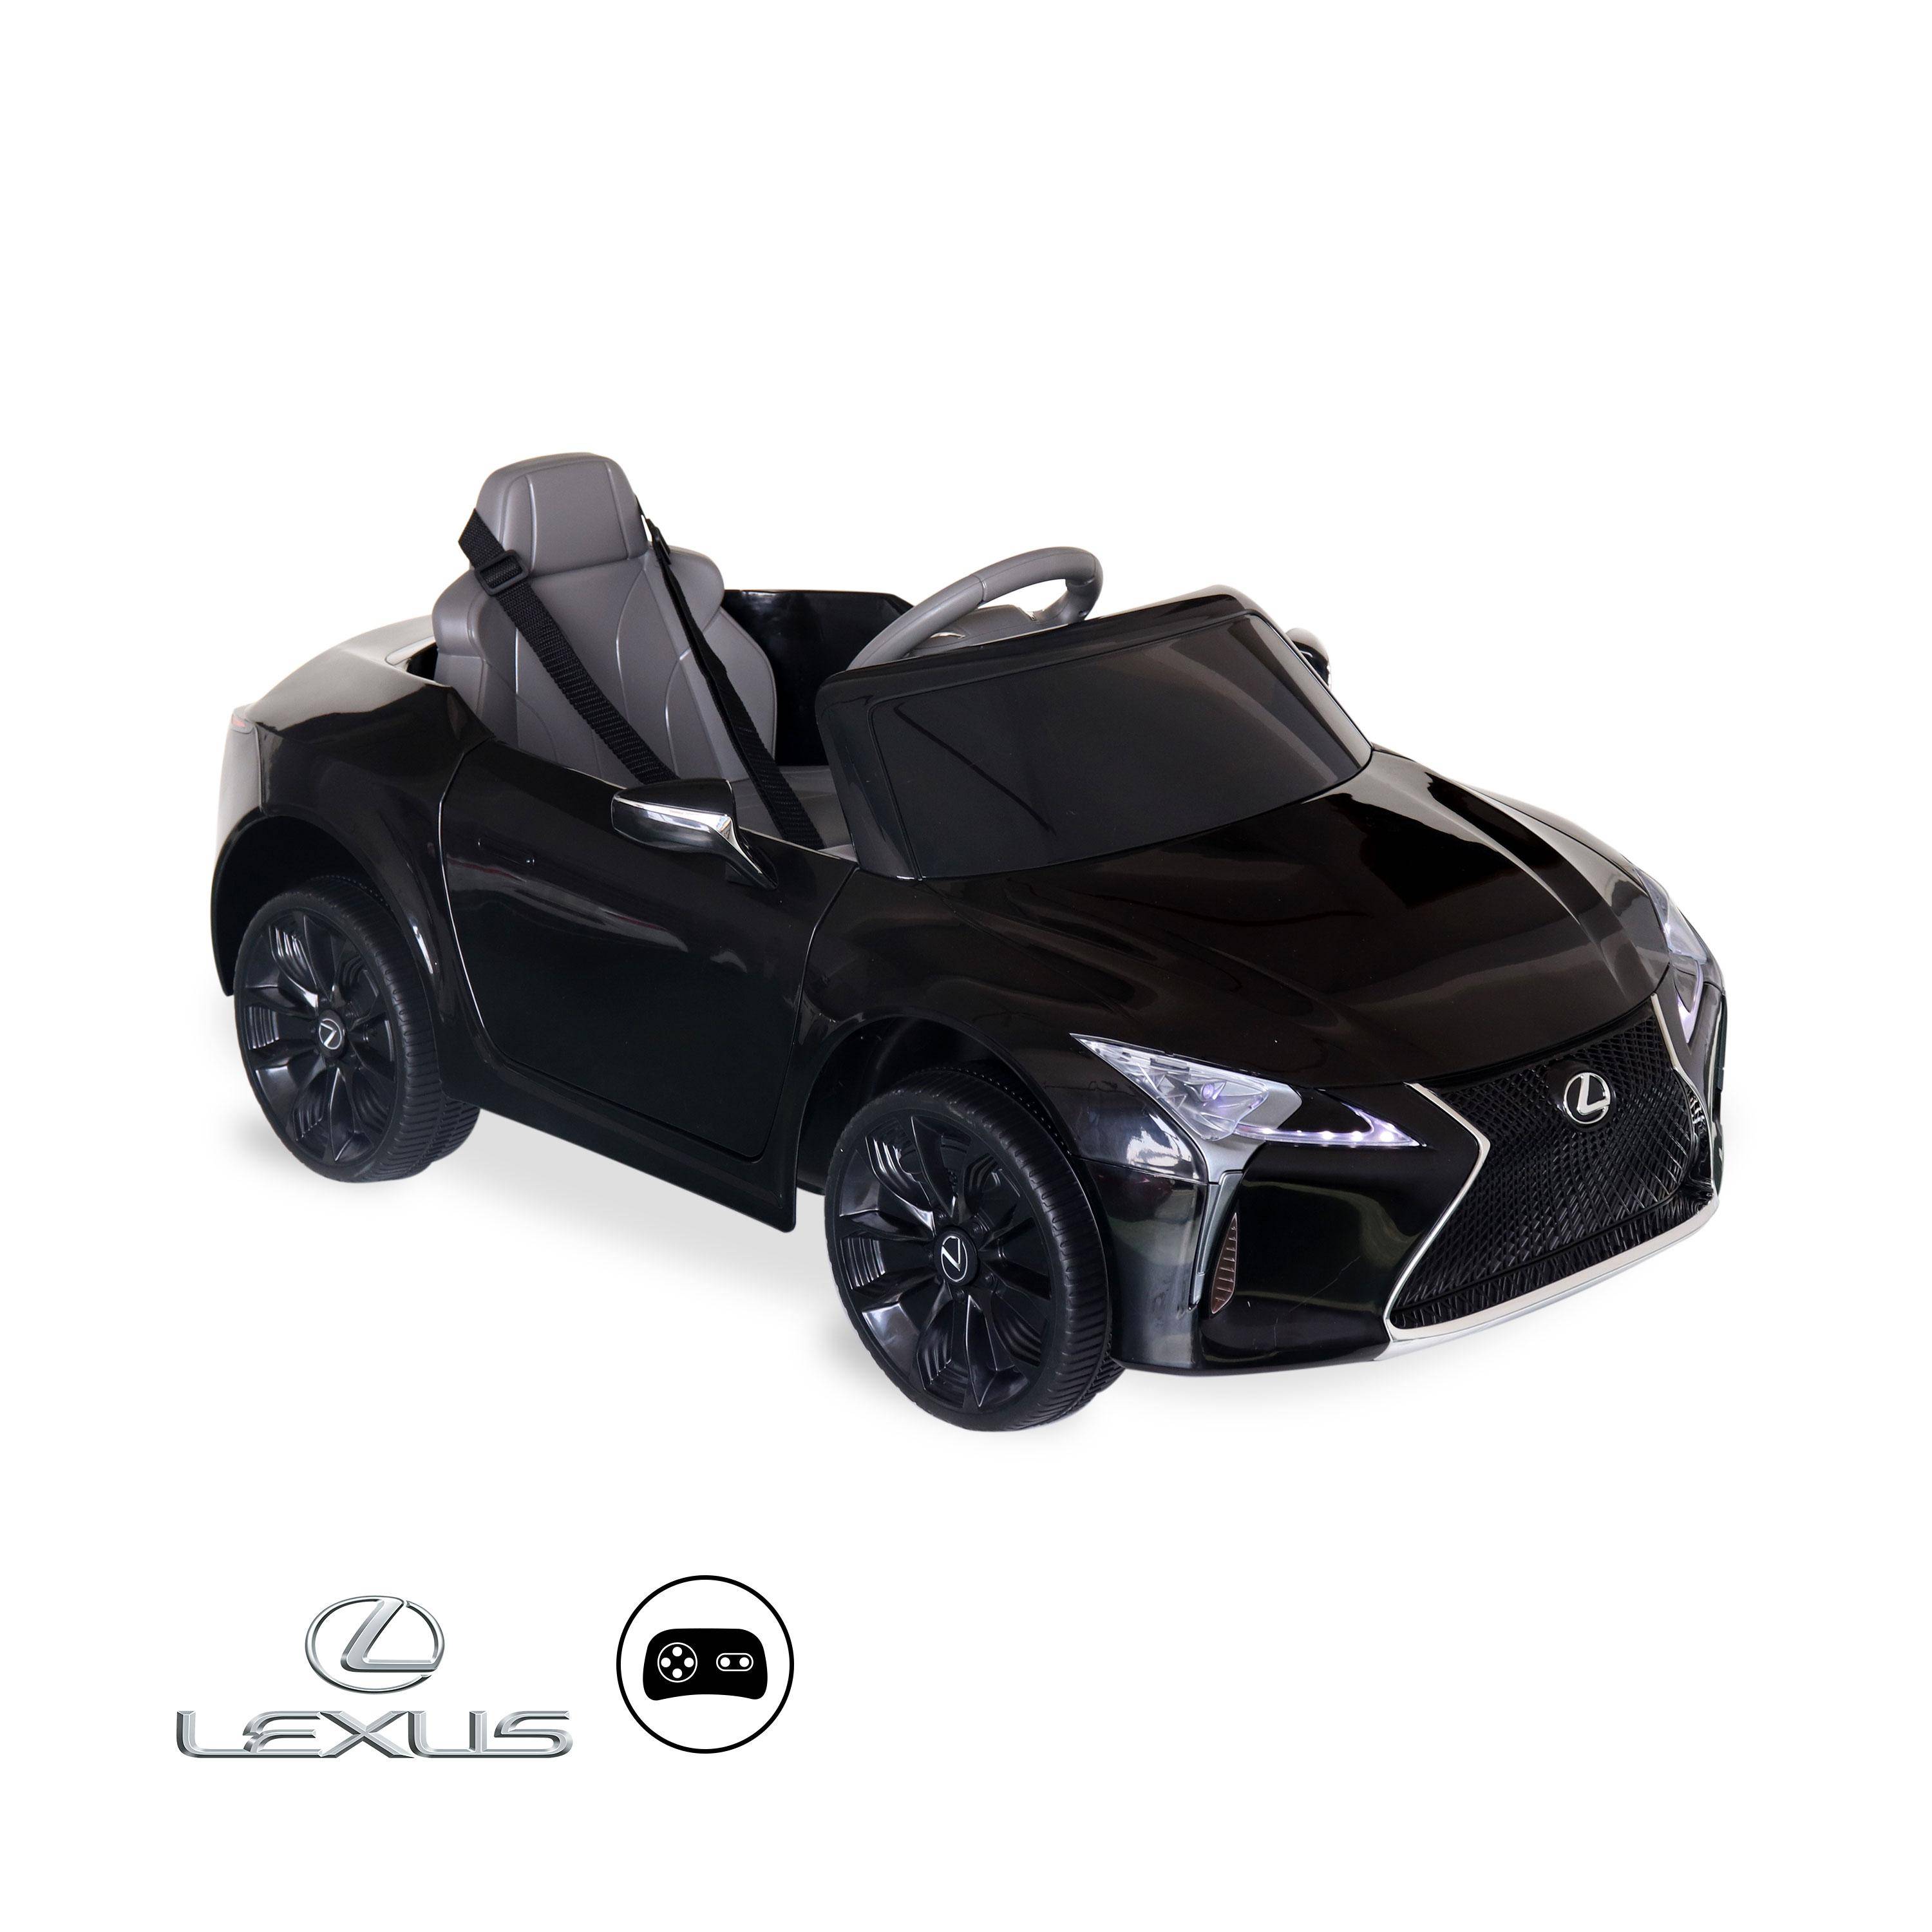 Children's electric car 12V, 1 seat, 4x4 with car radio and remote control - Lexus LC500 - Black,sweeek,Photo1